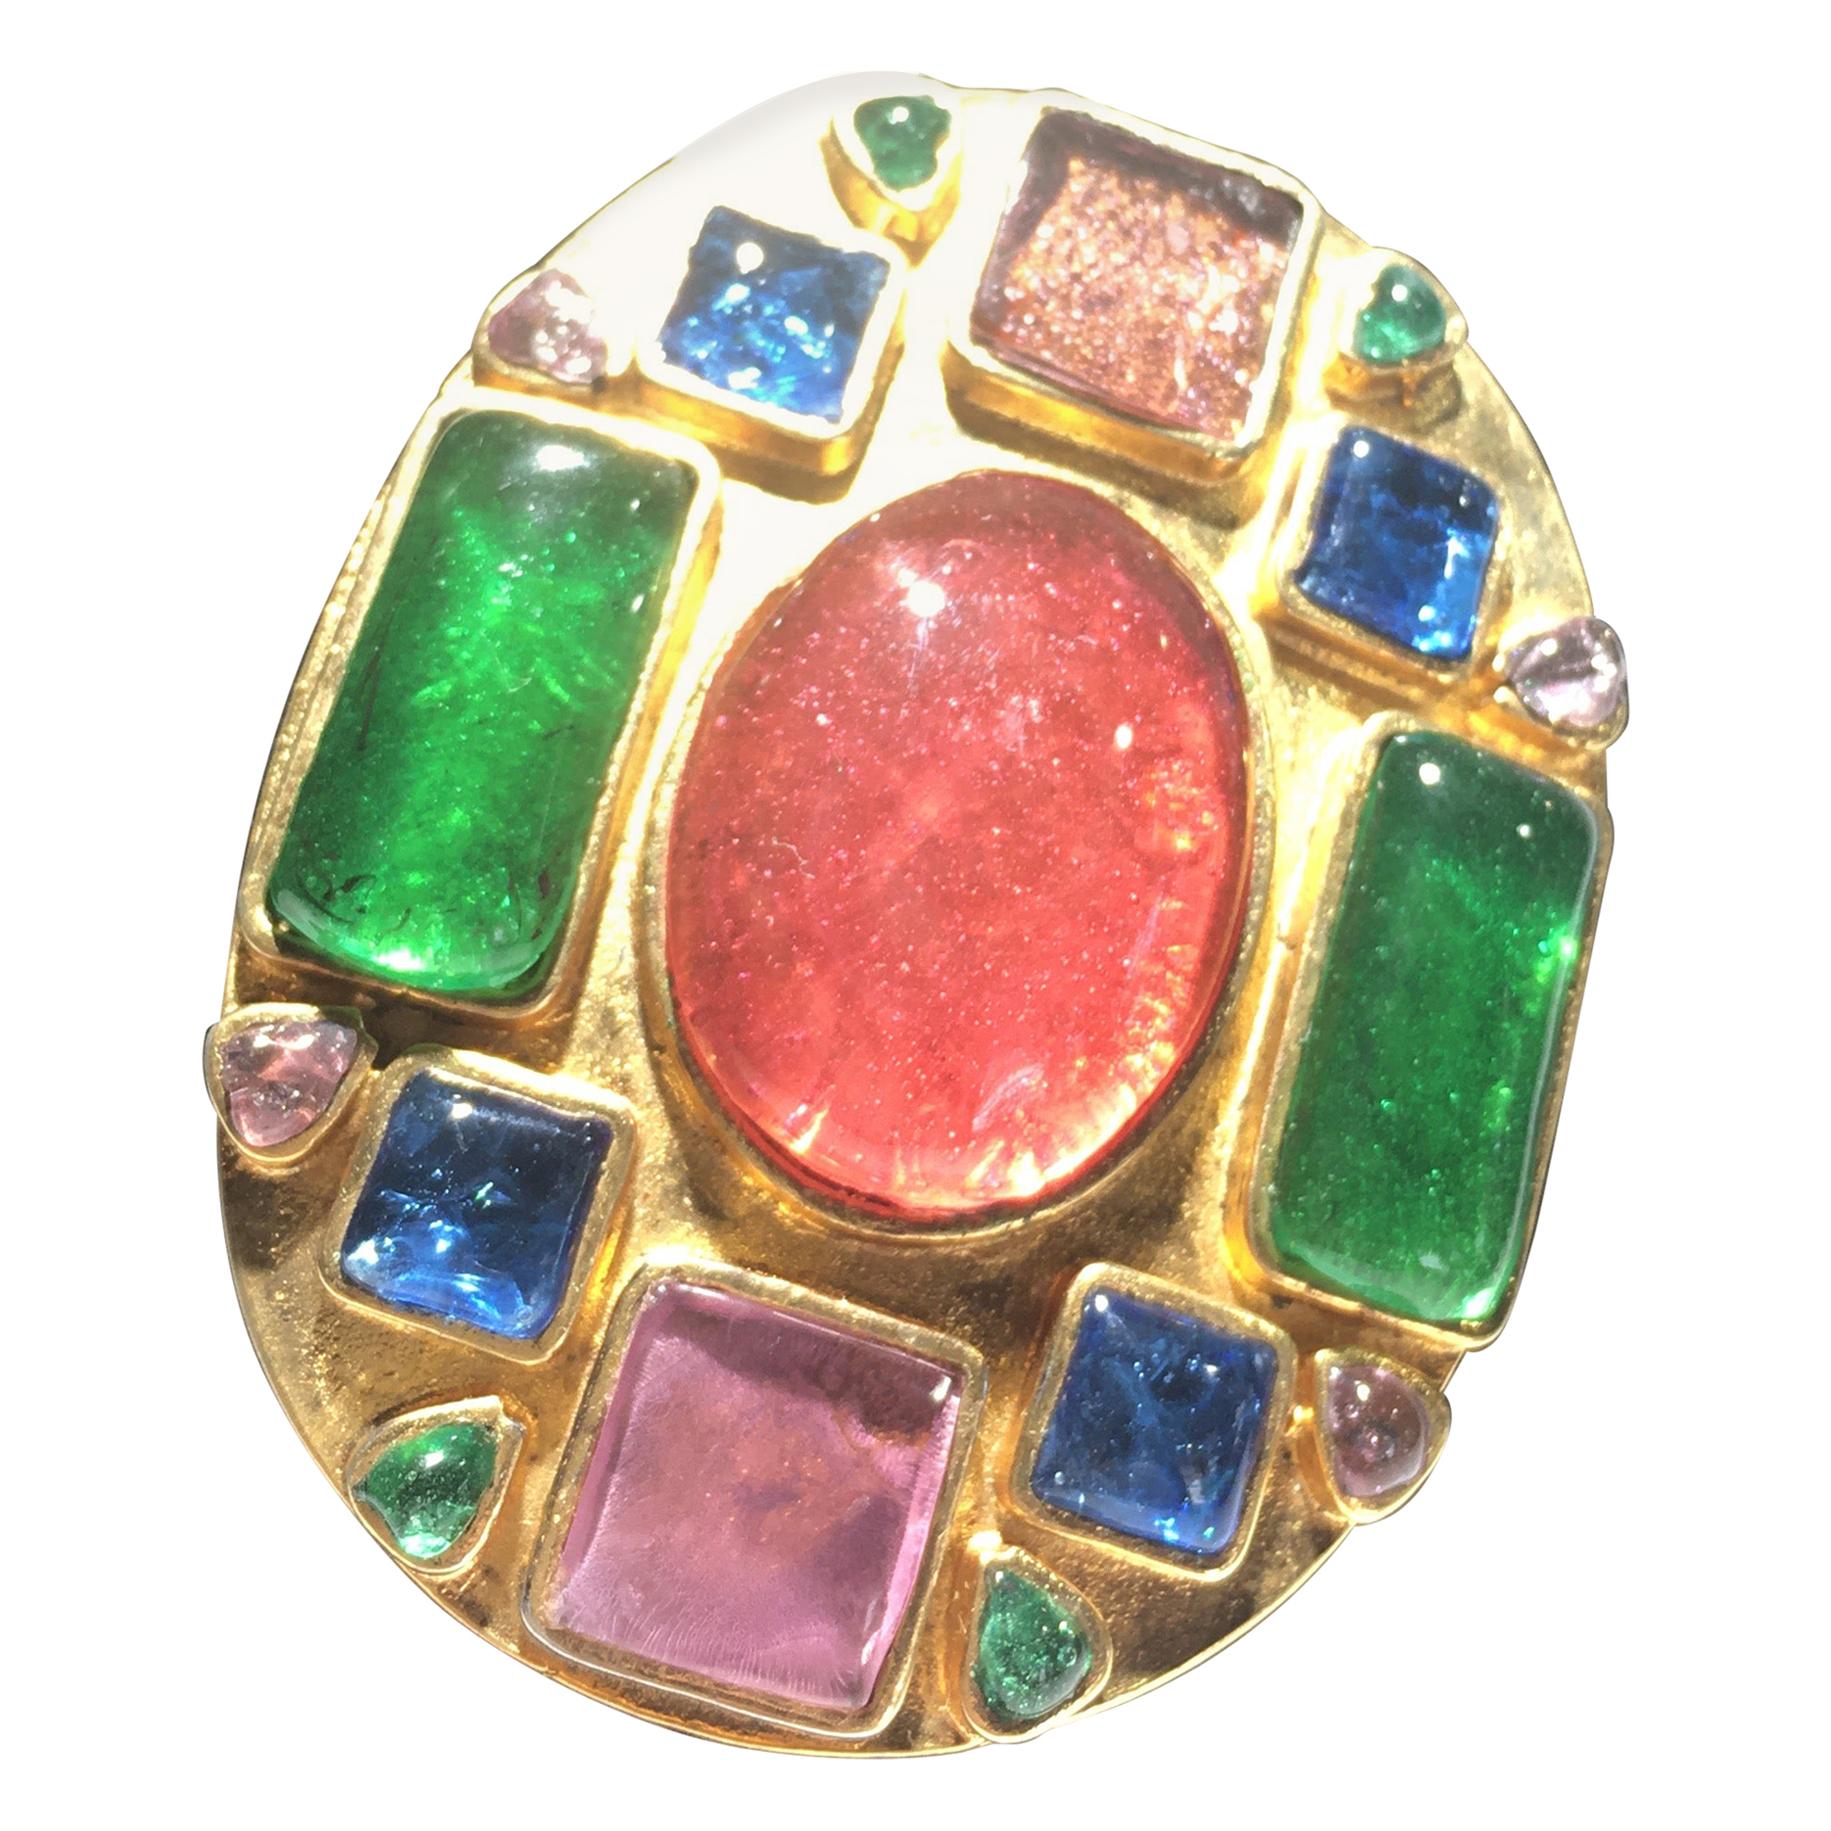 Beautiful Chanel Multi Colored Stone Broach With Chanel Box